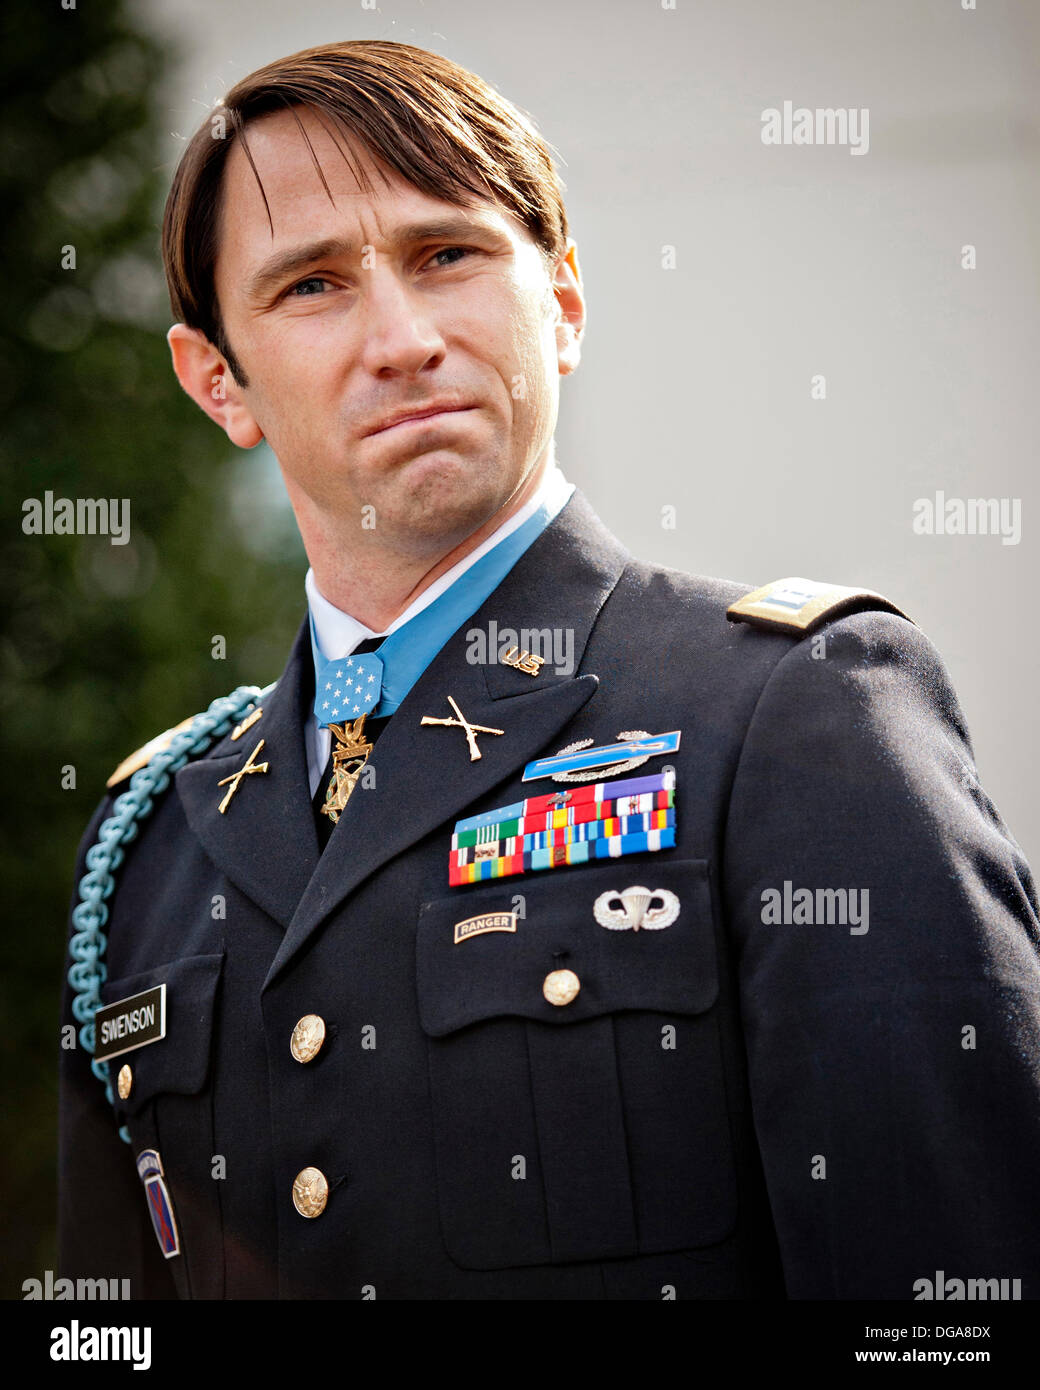 Former US Army Capt. William D. Swenson speaks to the media outside the White House after he was presented with the Medal of Honor by President Barack Obama October 15, 2013 in Washington, DC. The Medal of Honor is the nation's highest military honor. Stock Photo